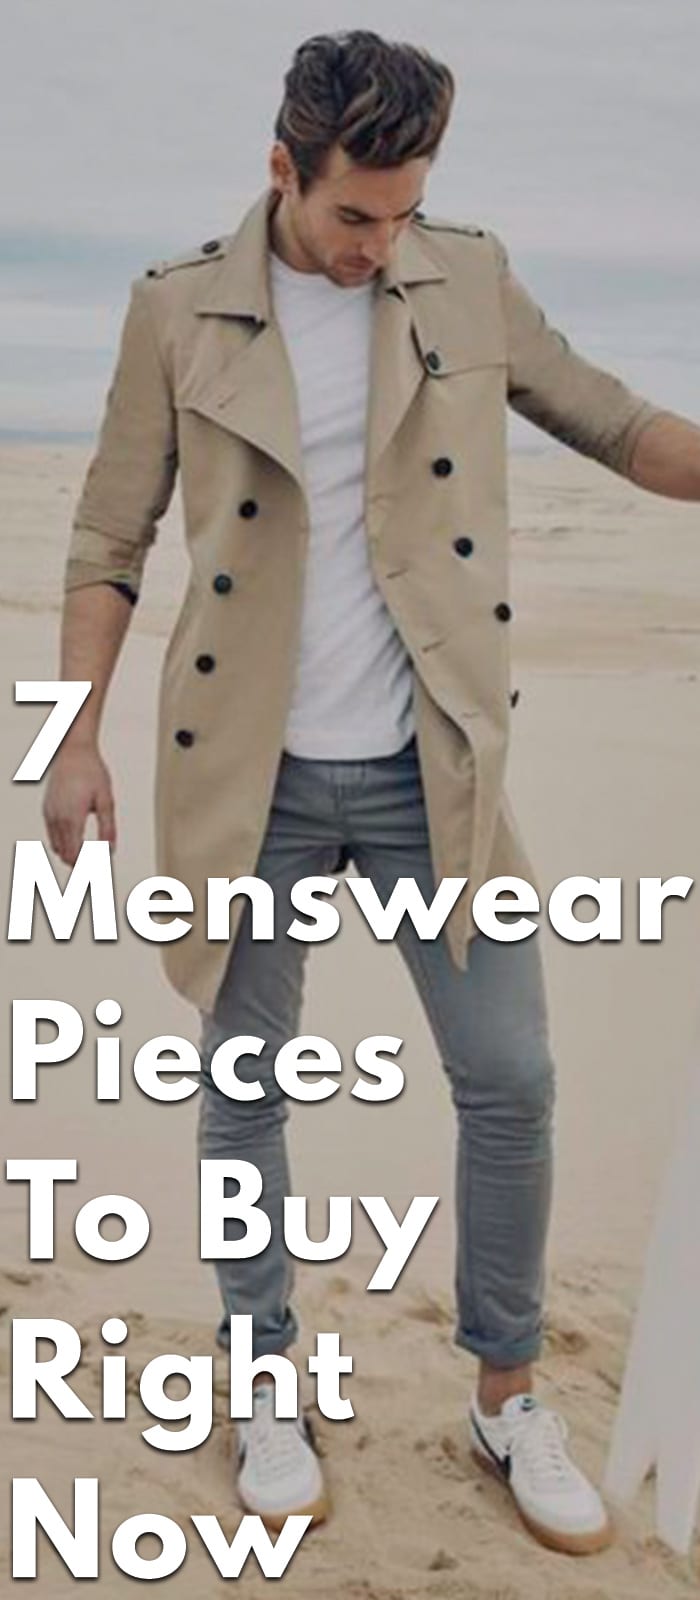 7 Menswear Pieces To Buy Right Now